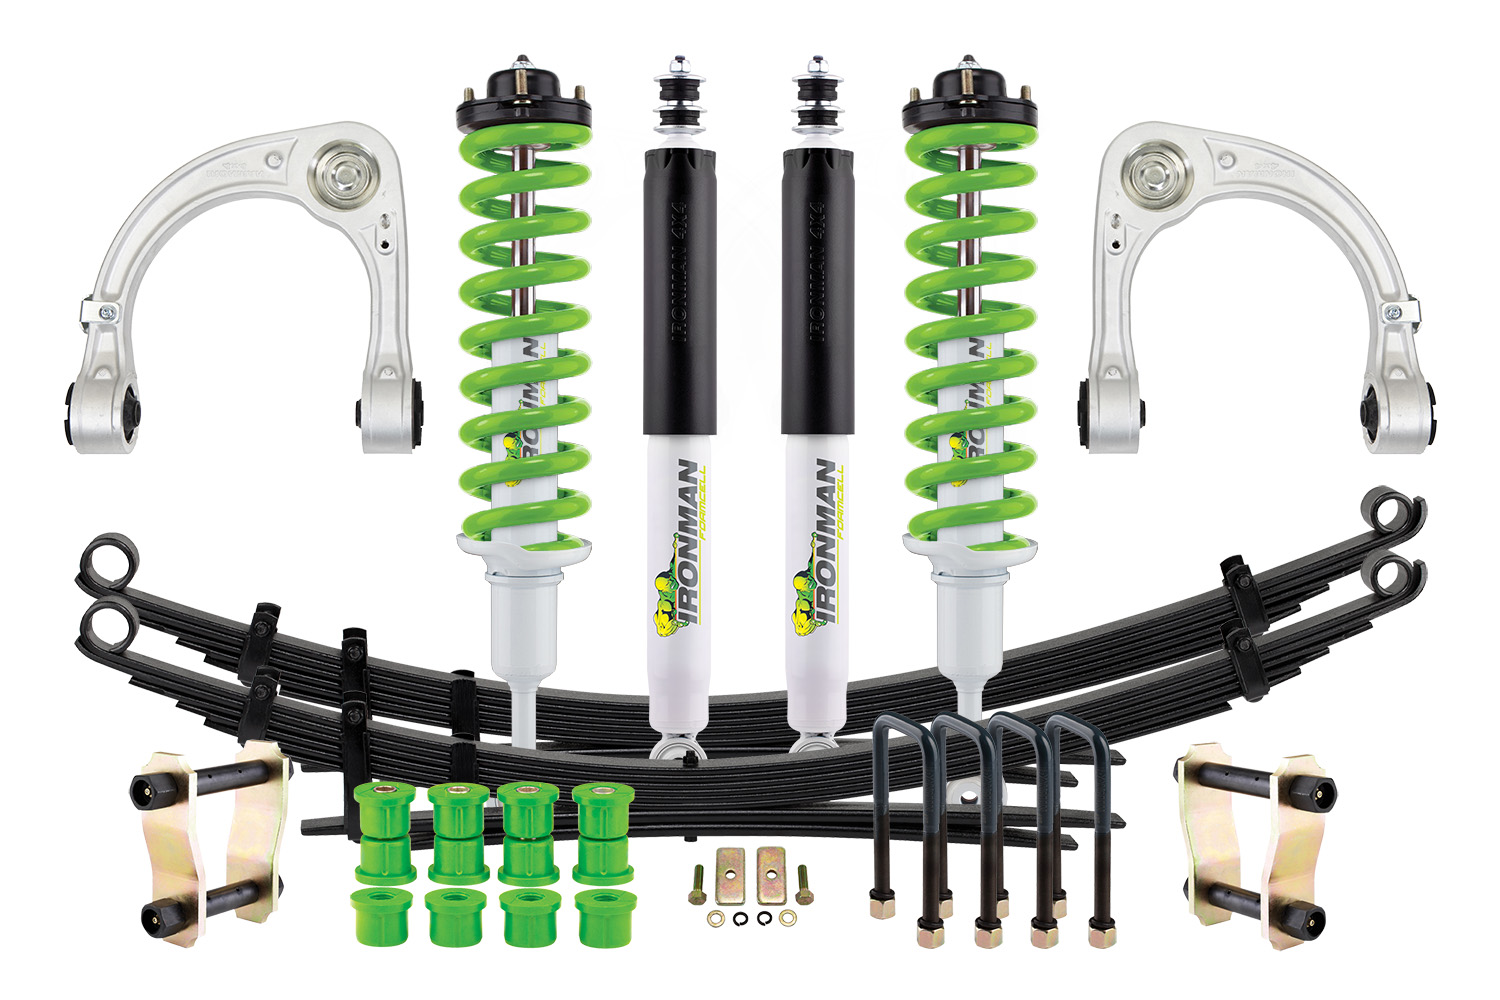 Foam Cell 3.5" Suspension Kit Suited for Toyota Tundra 2007-2021 - Stage 2 Questions & Answers